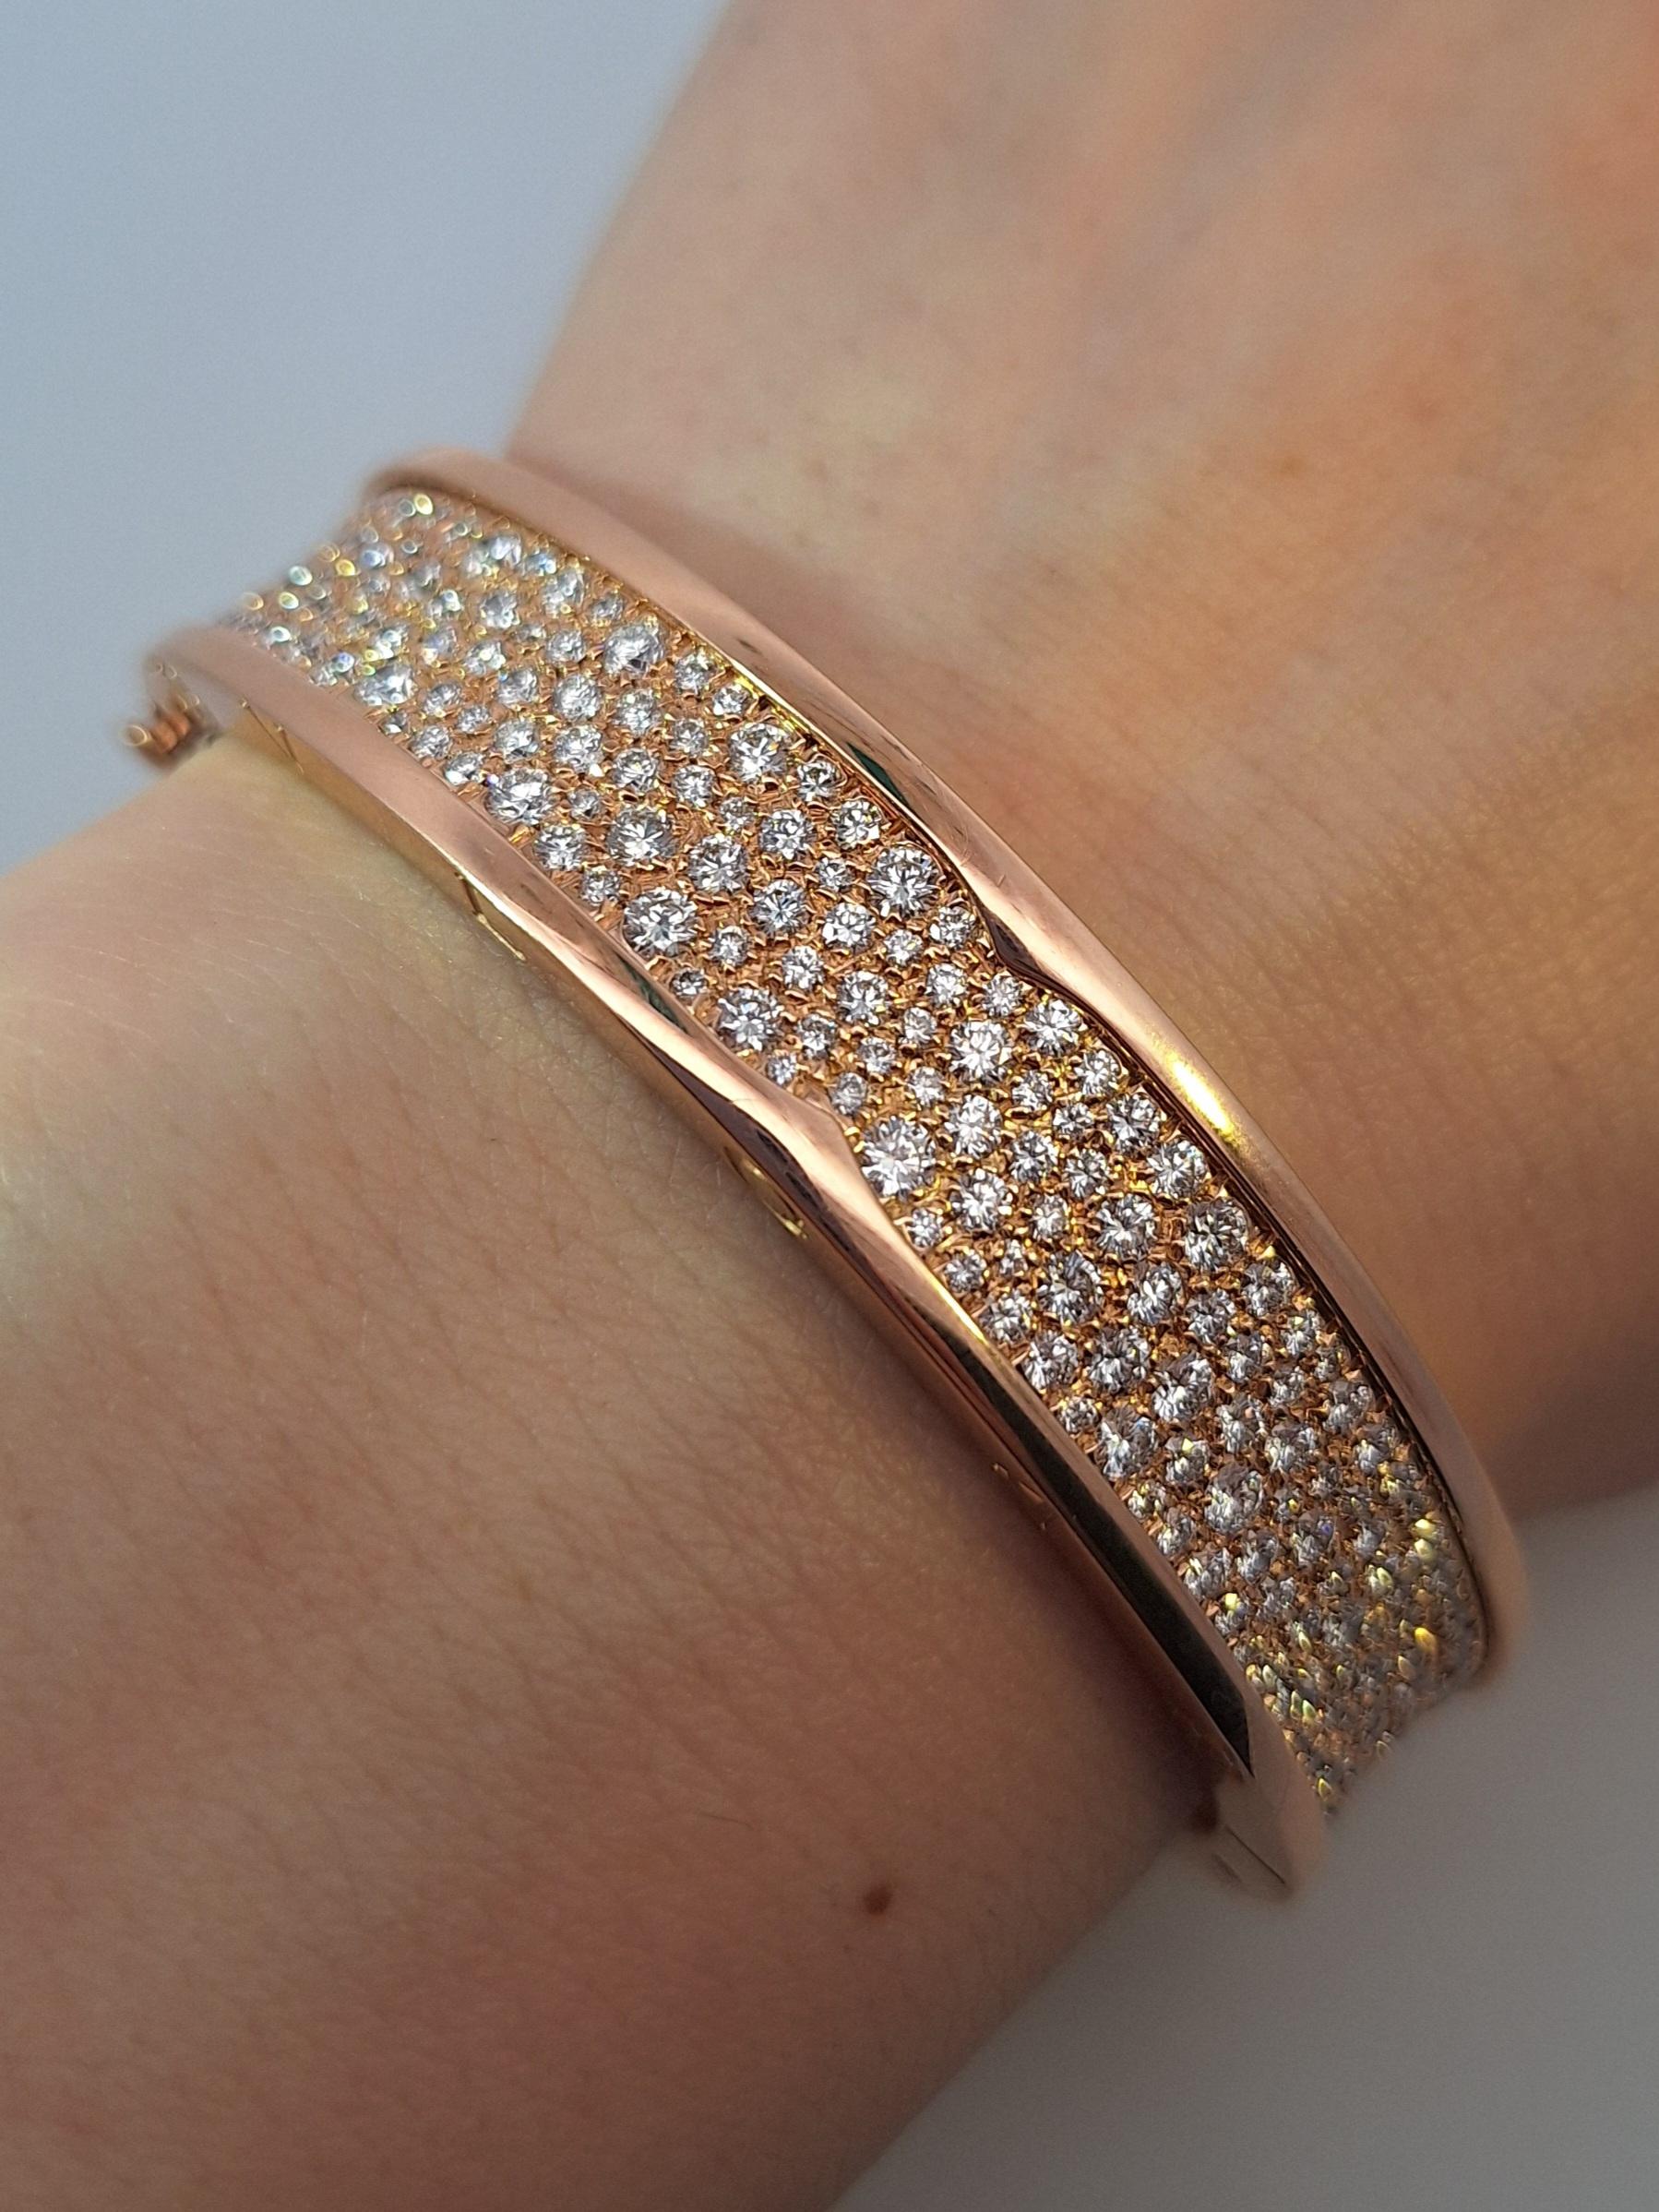 Stone: Pave Set Round Cut Diamonds

Total Carat Weight: Approx. 10.00Ctw

Metal: 18Kt Rose Gold

Bracelet Length: Medium Size

Weight: 56 Grams

Video is available upon request